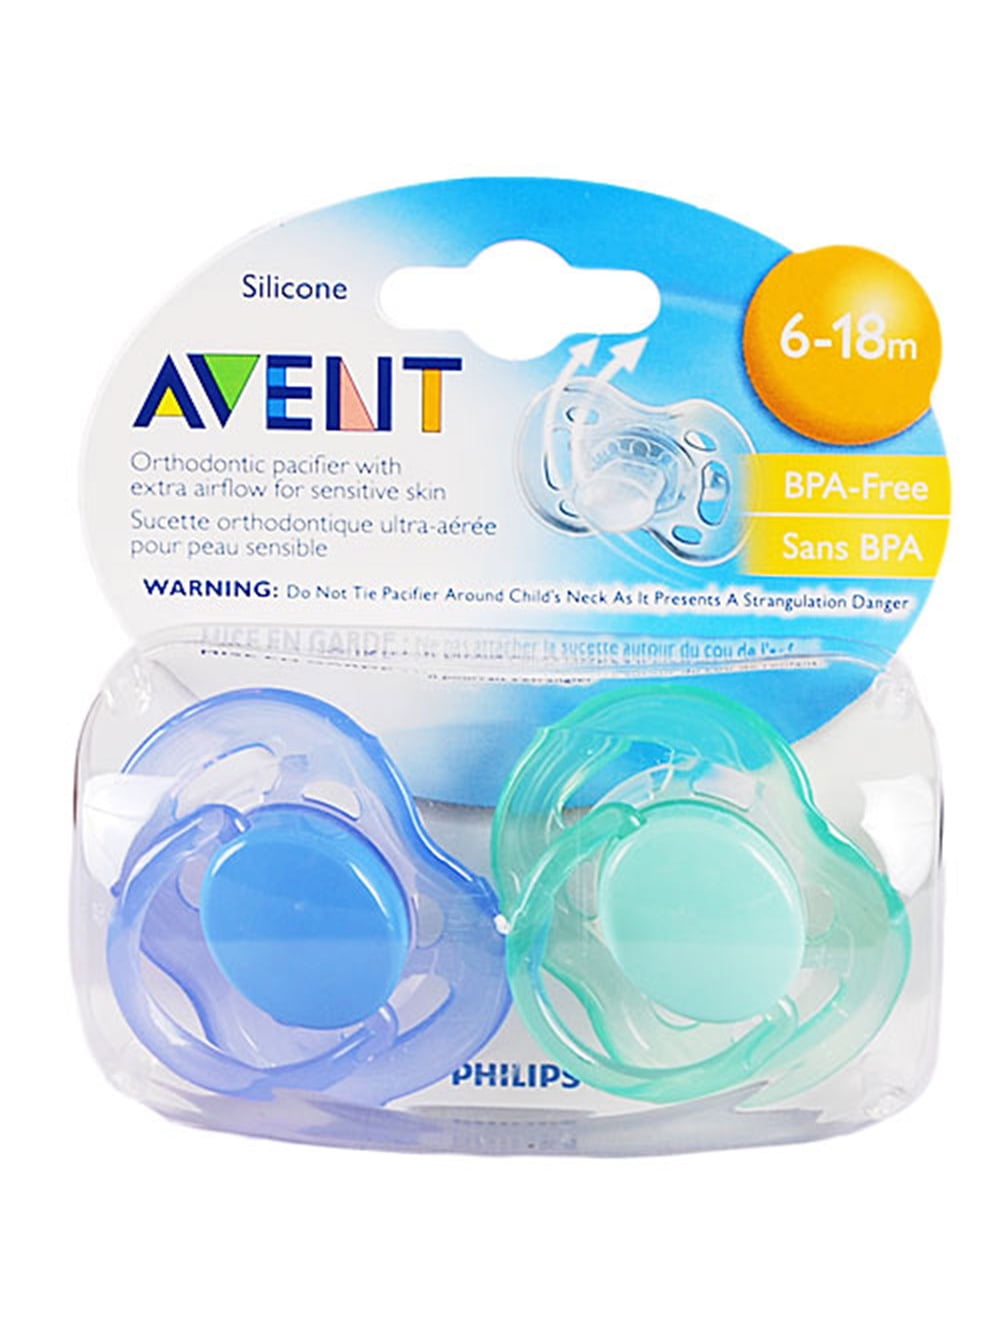 AVENT Freeflow Orthodontic Silicone Soothers BPA Free 